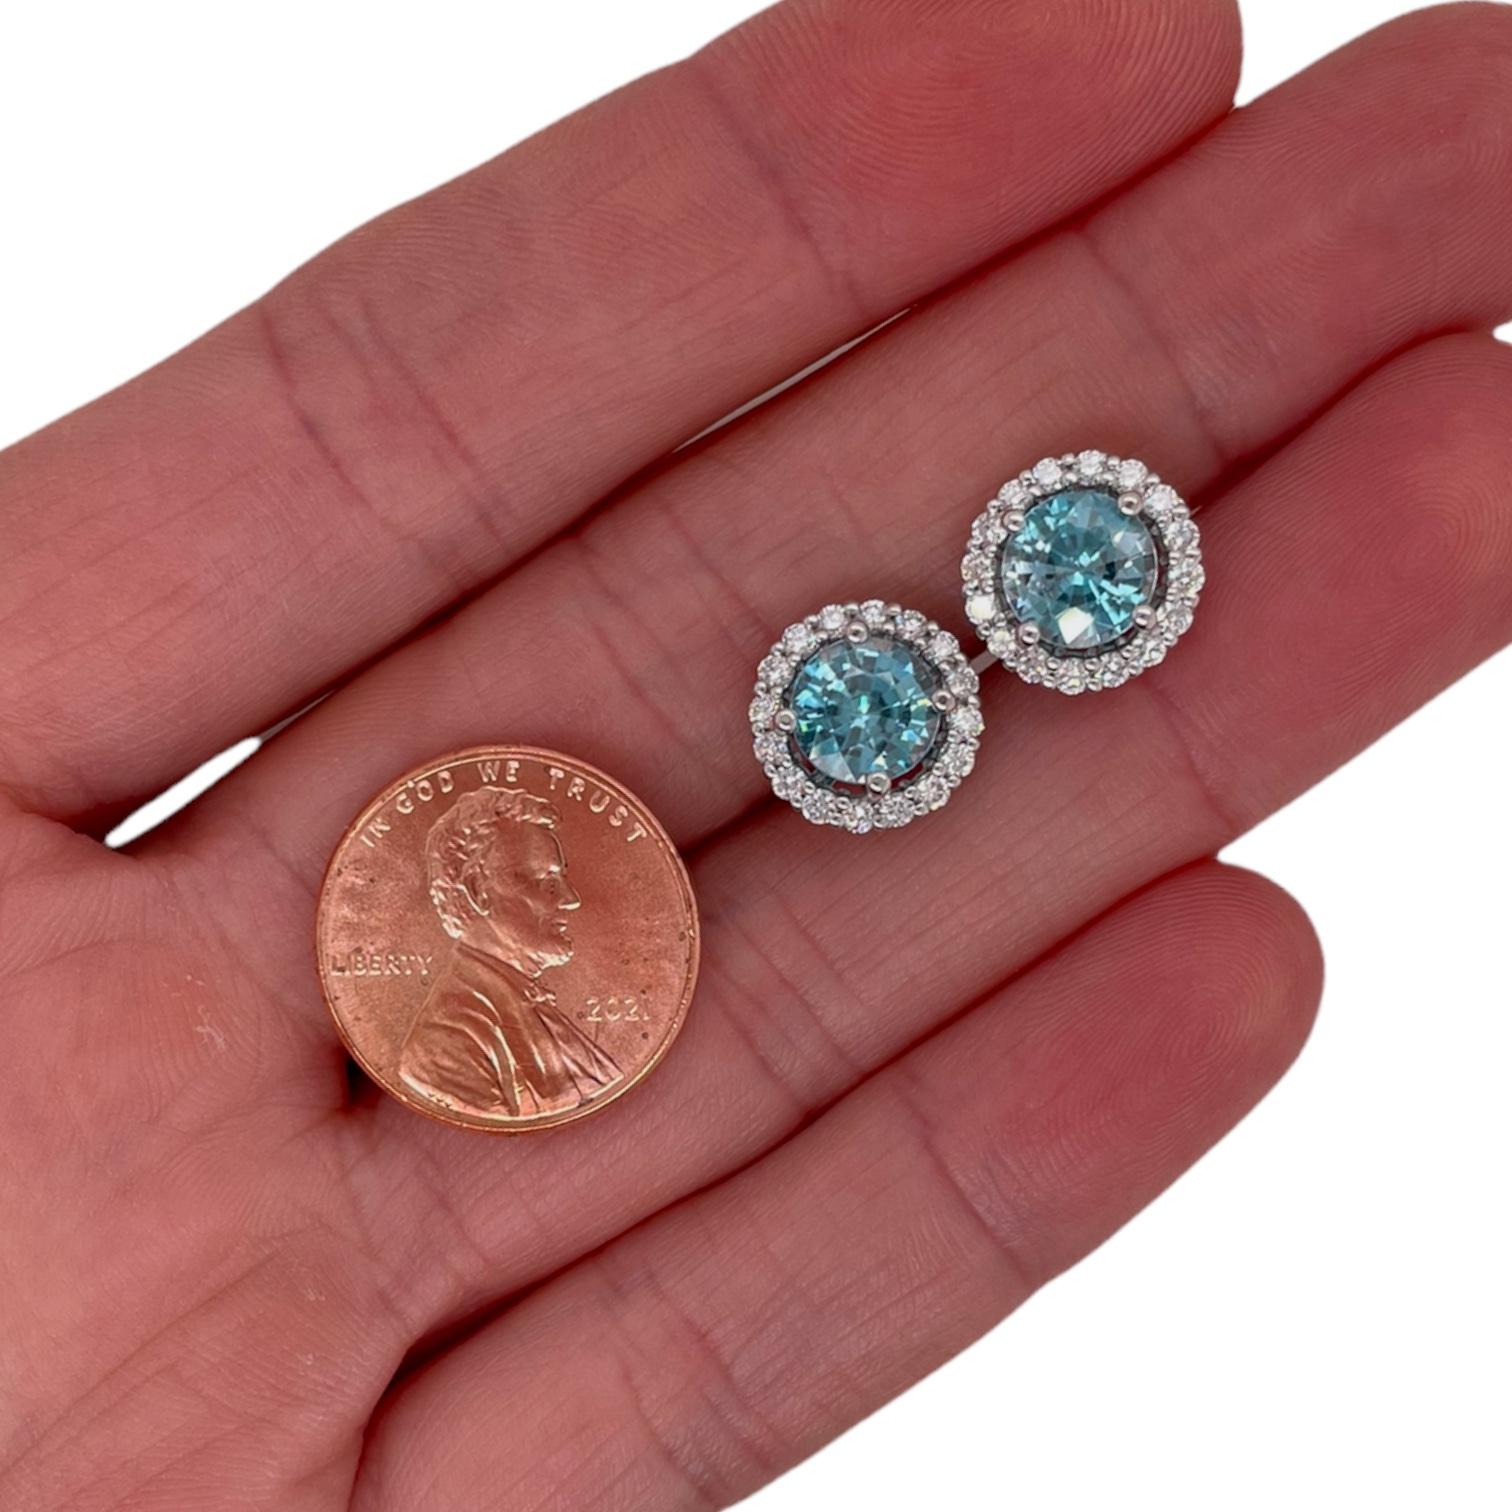 Classic diamond halo & blue zircon stud earrings in 18k white gold. Earrings contain 2 round brilliant blue zircons 3.81tcw, measuring approximately 6.9mm and round brilliant diamonds surrounding 0.55tcw. Diamonds are near colorless and SI1 in